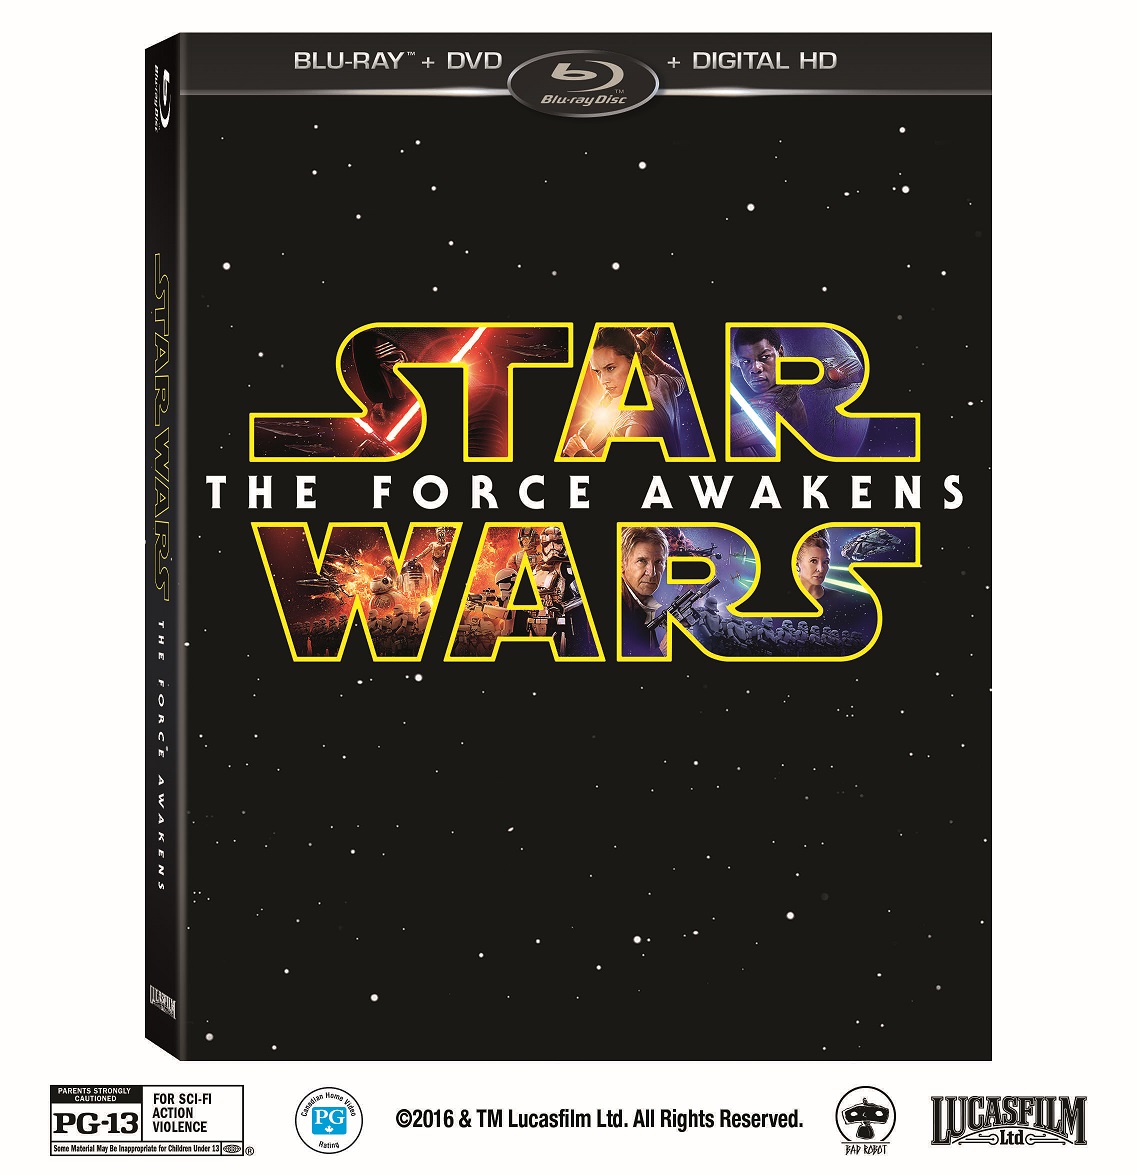 Star Wars The Force Awakens deleted scenes will be available on the blu-ray and dvd home editions